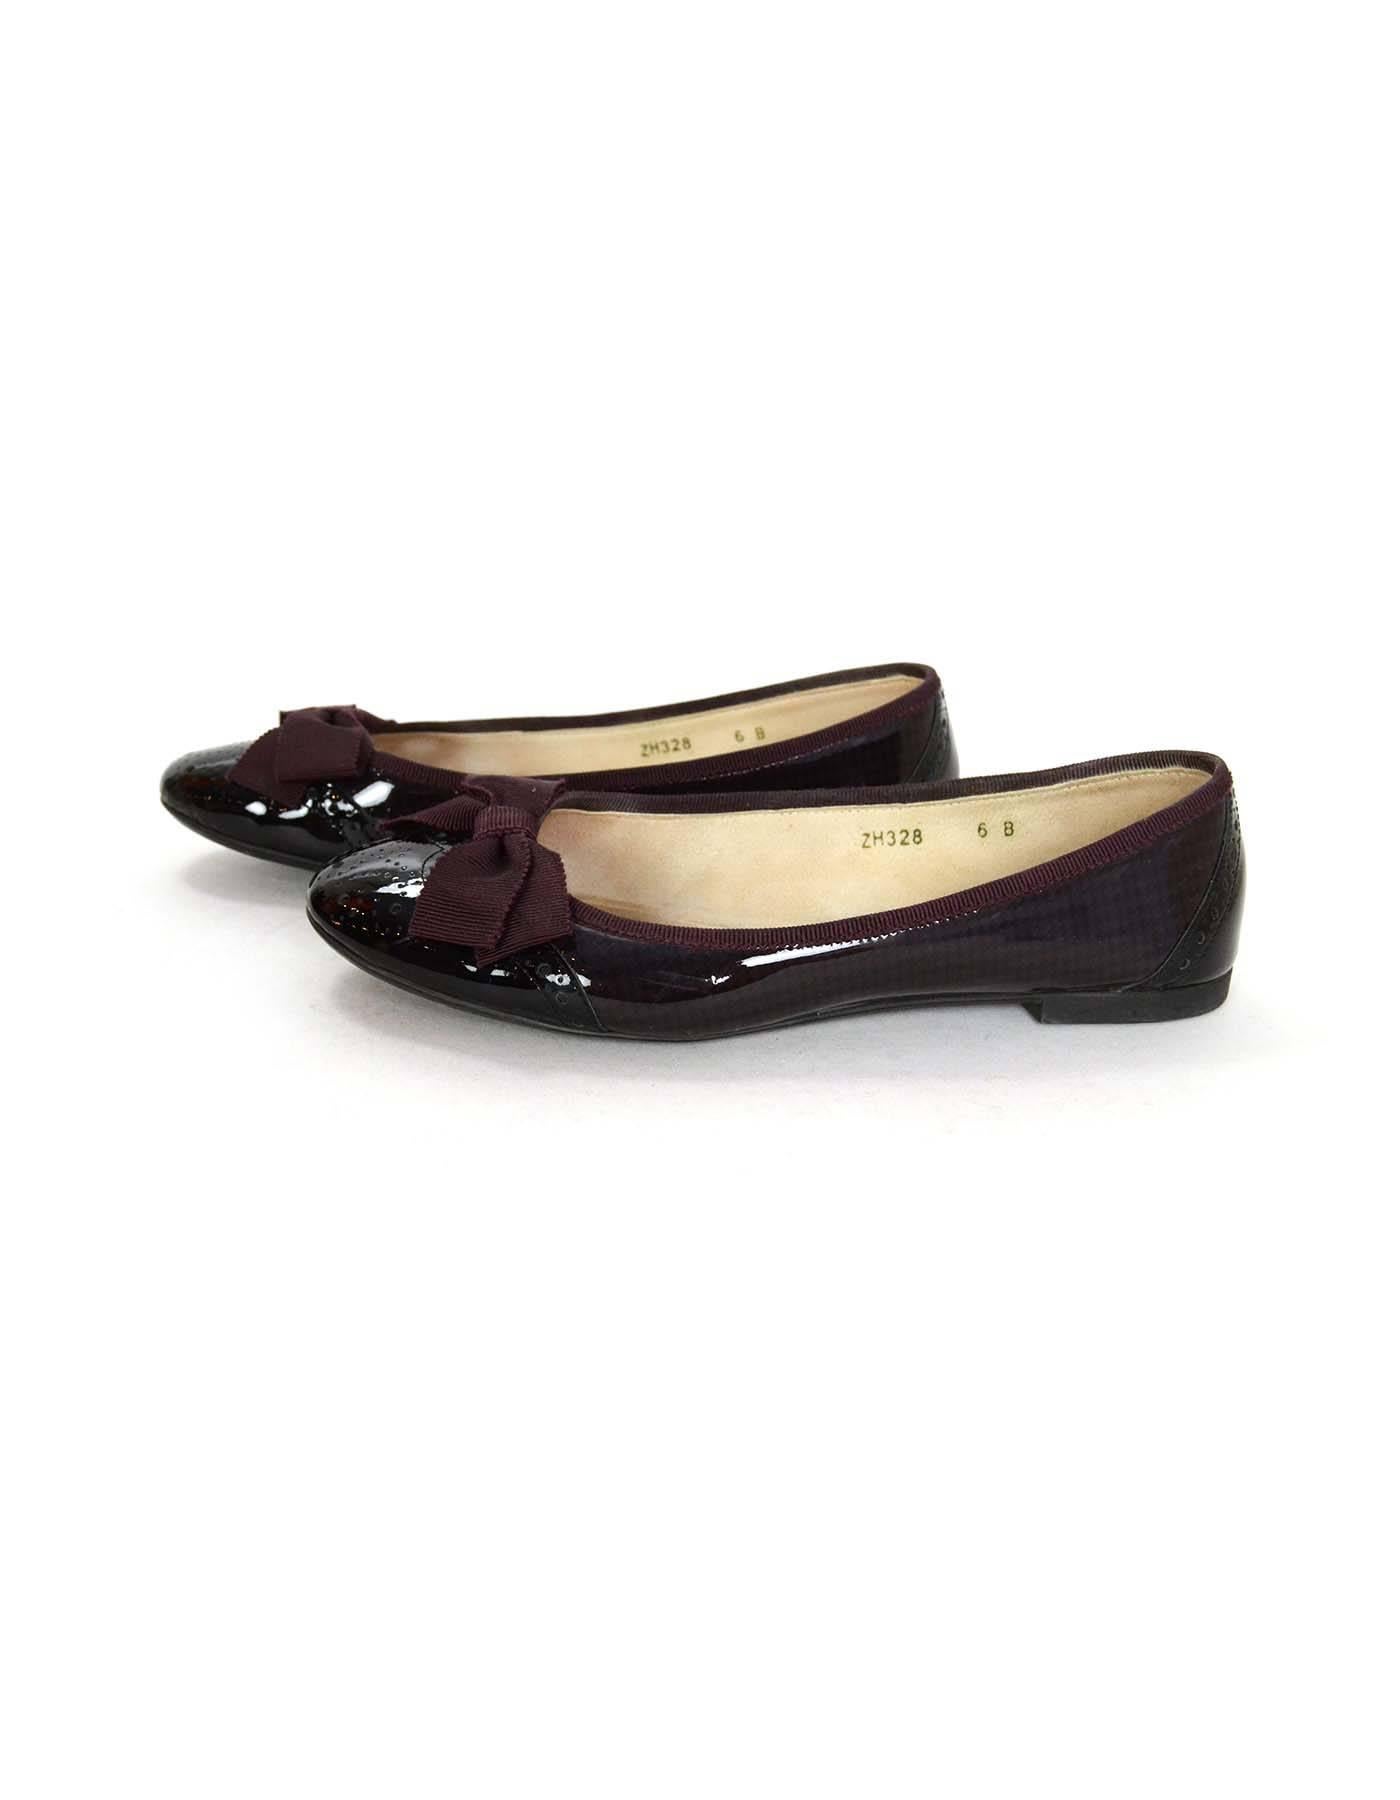 Salvatore Ferragamo Black and Burgundy Flats Sz 6
Features patent leather houndstooth design and perforated cap-toes and heels with bow detail at toes

Made In: Italy
Color: Black and burgundy
Materials: Patent leather
Closure/Opening: Slide